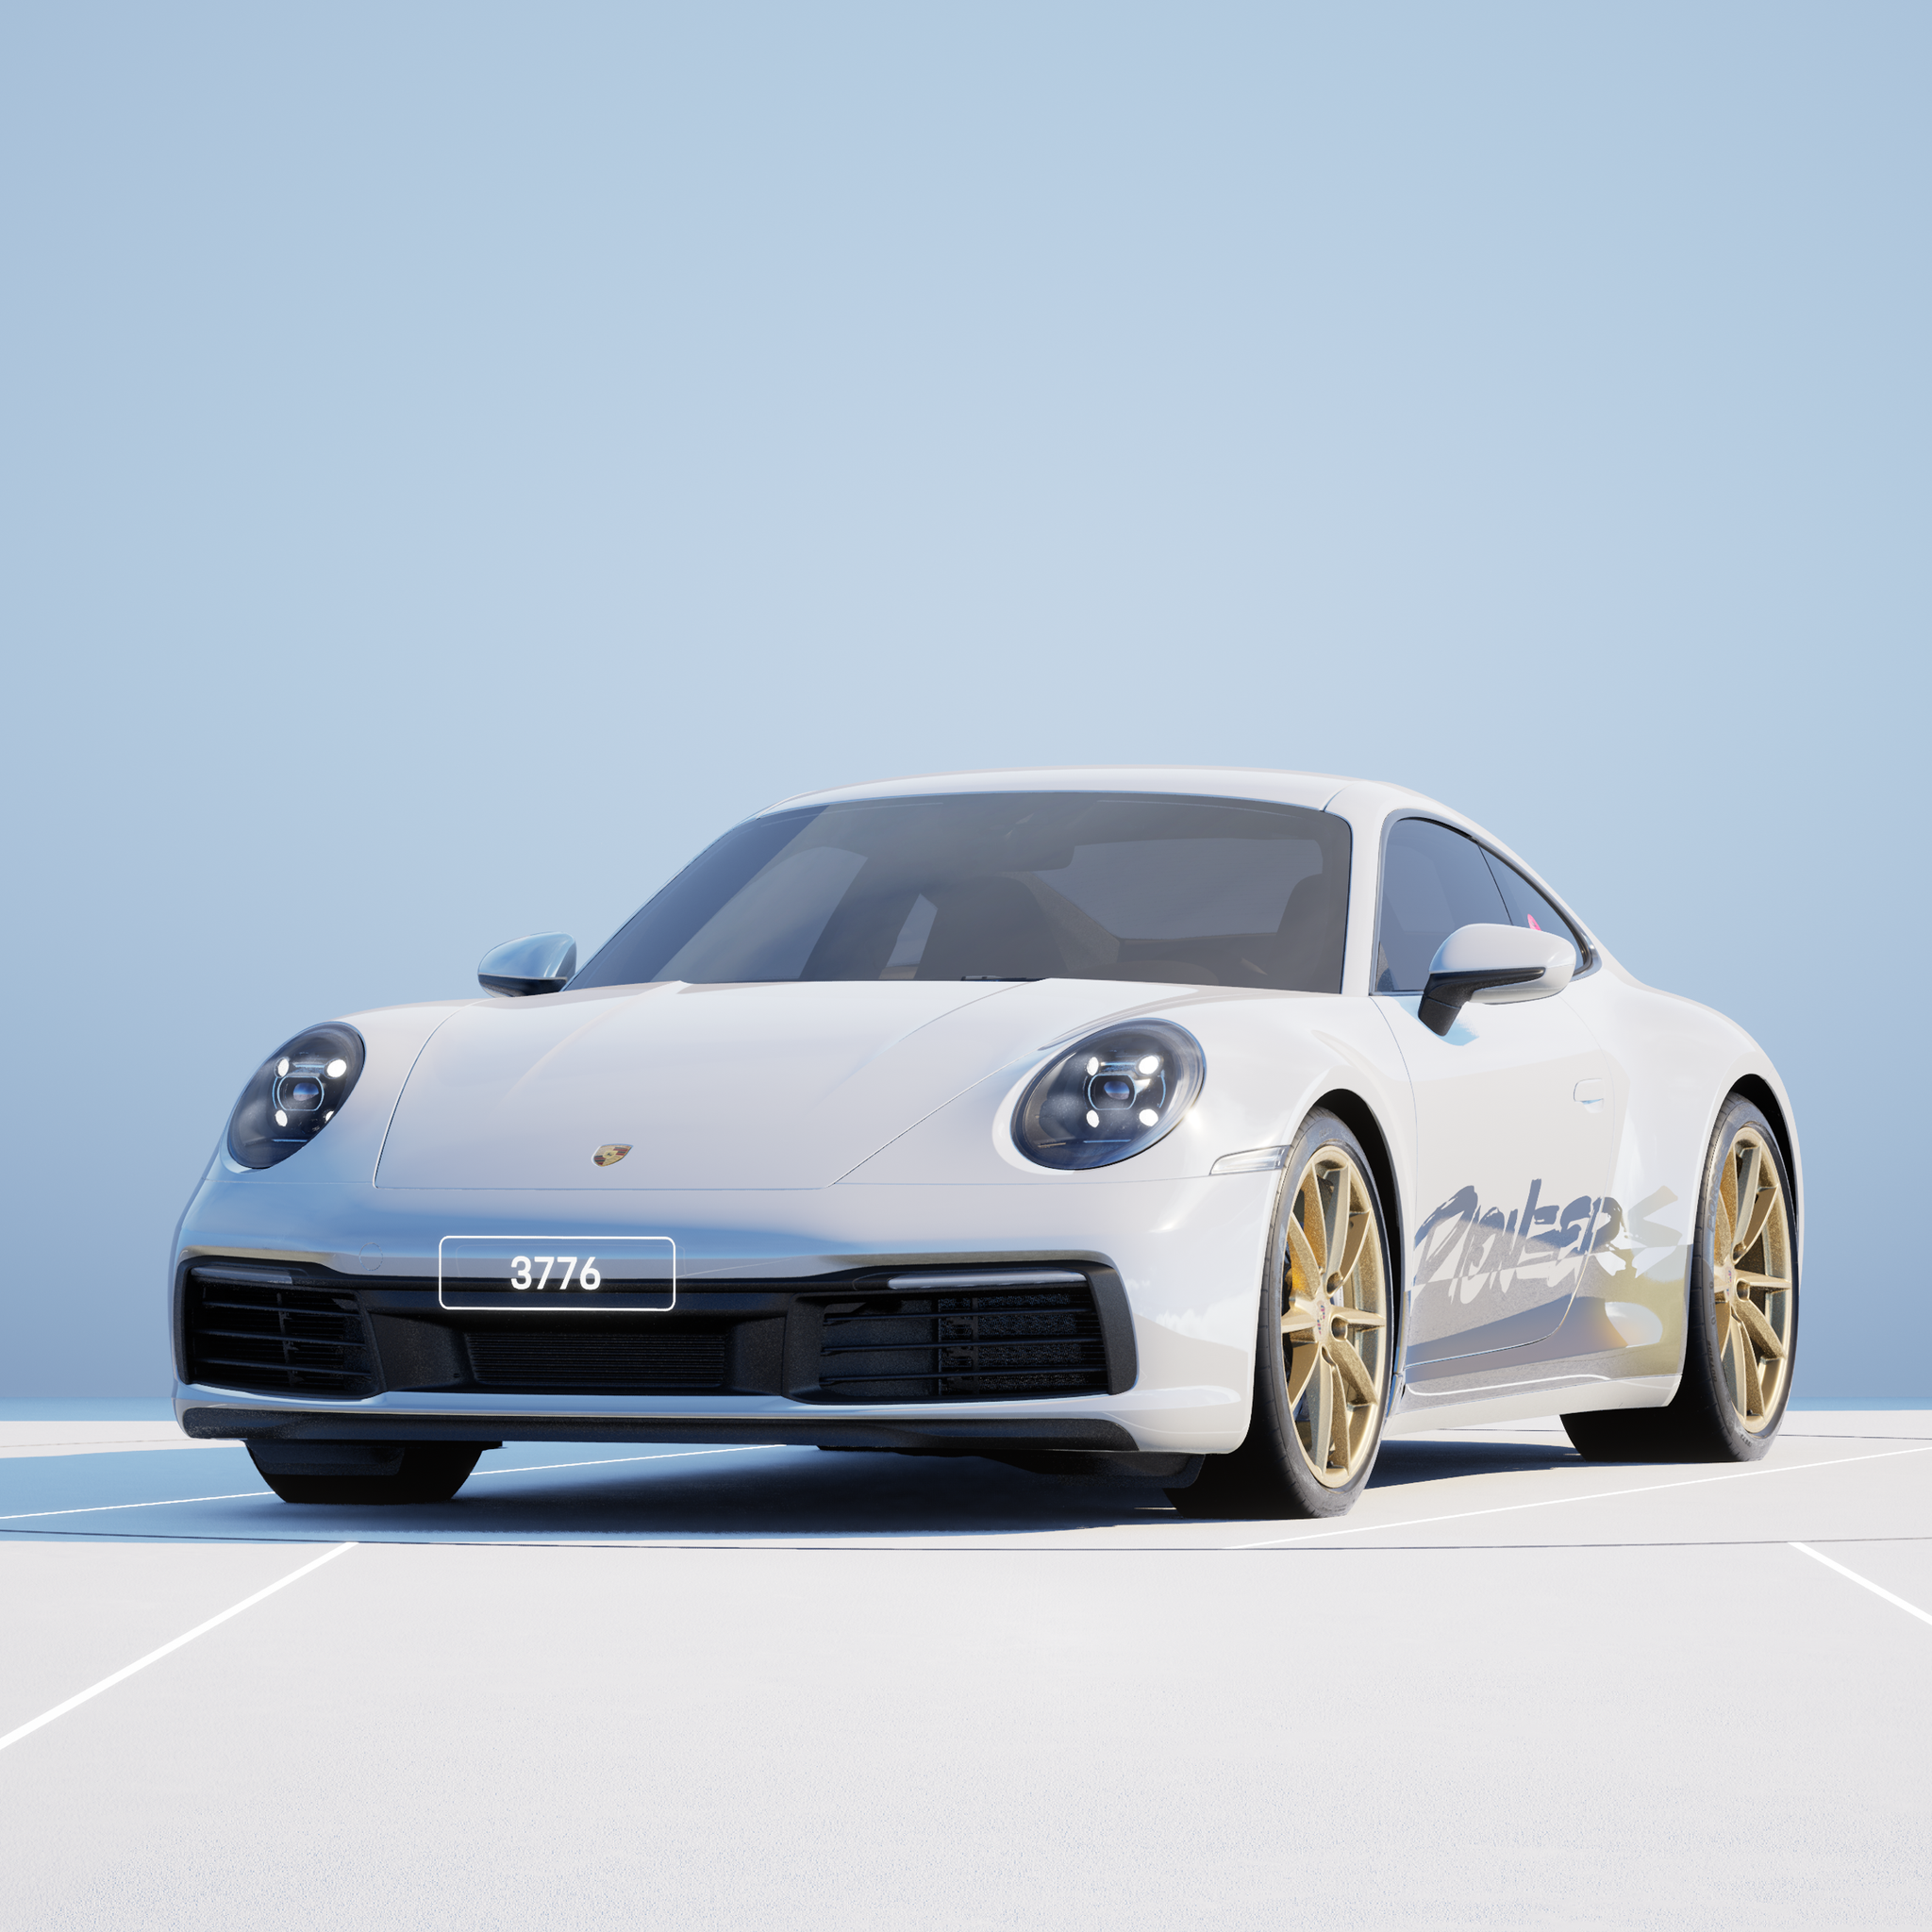 The PORSCHΞ 911 3776 image in phase